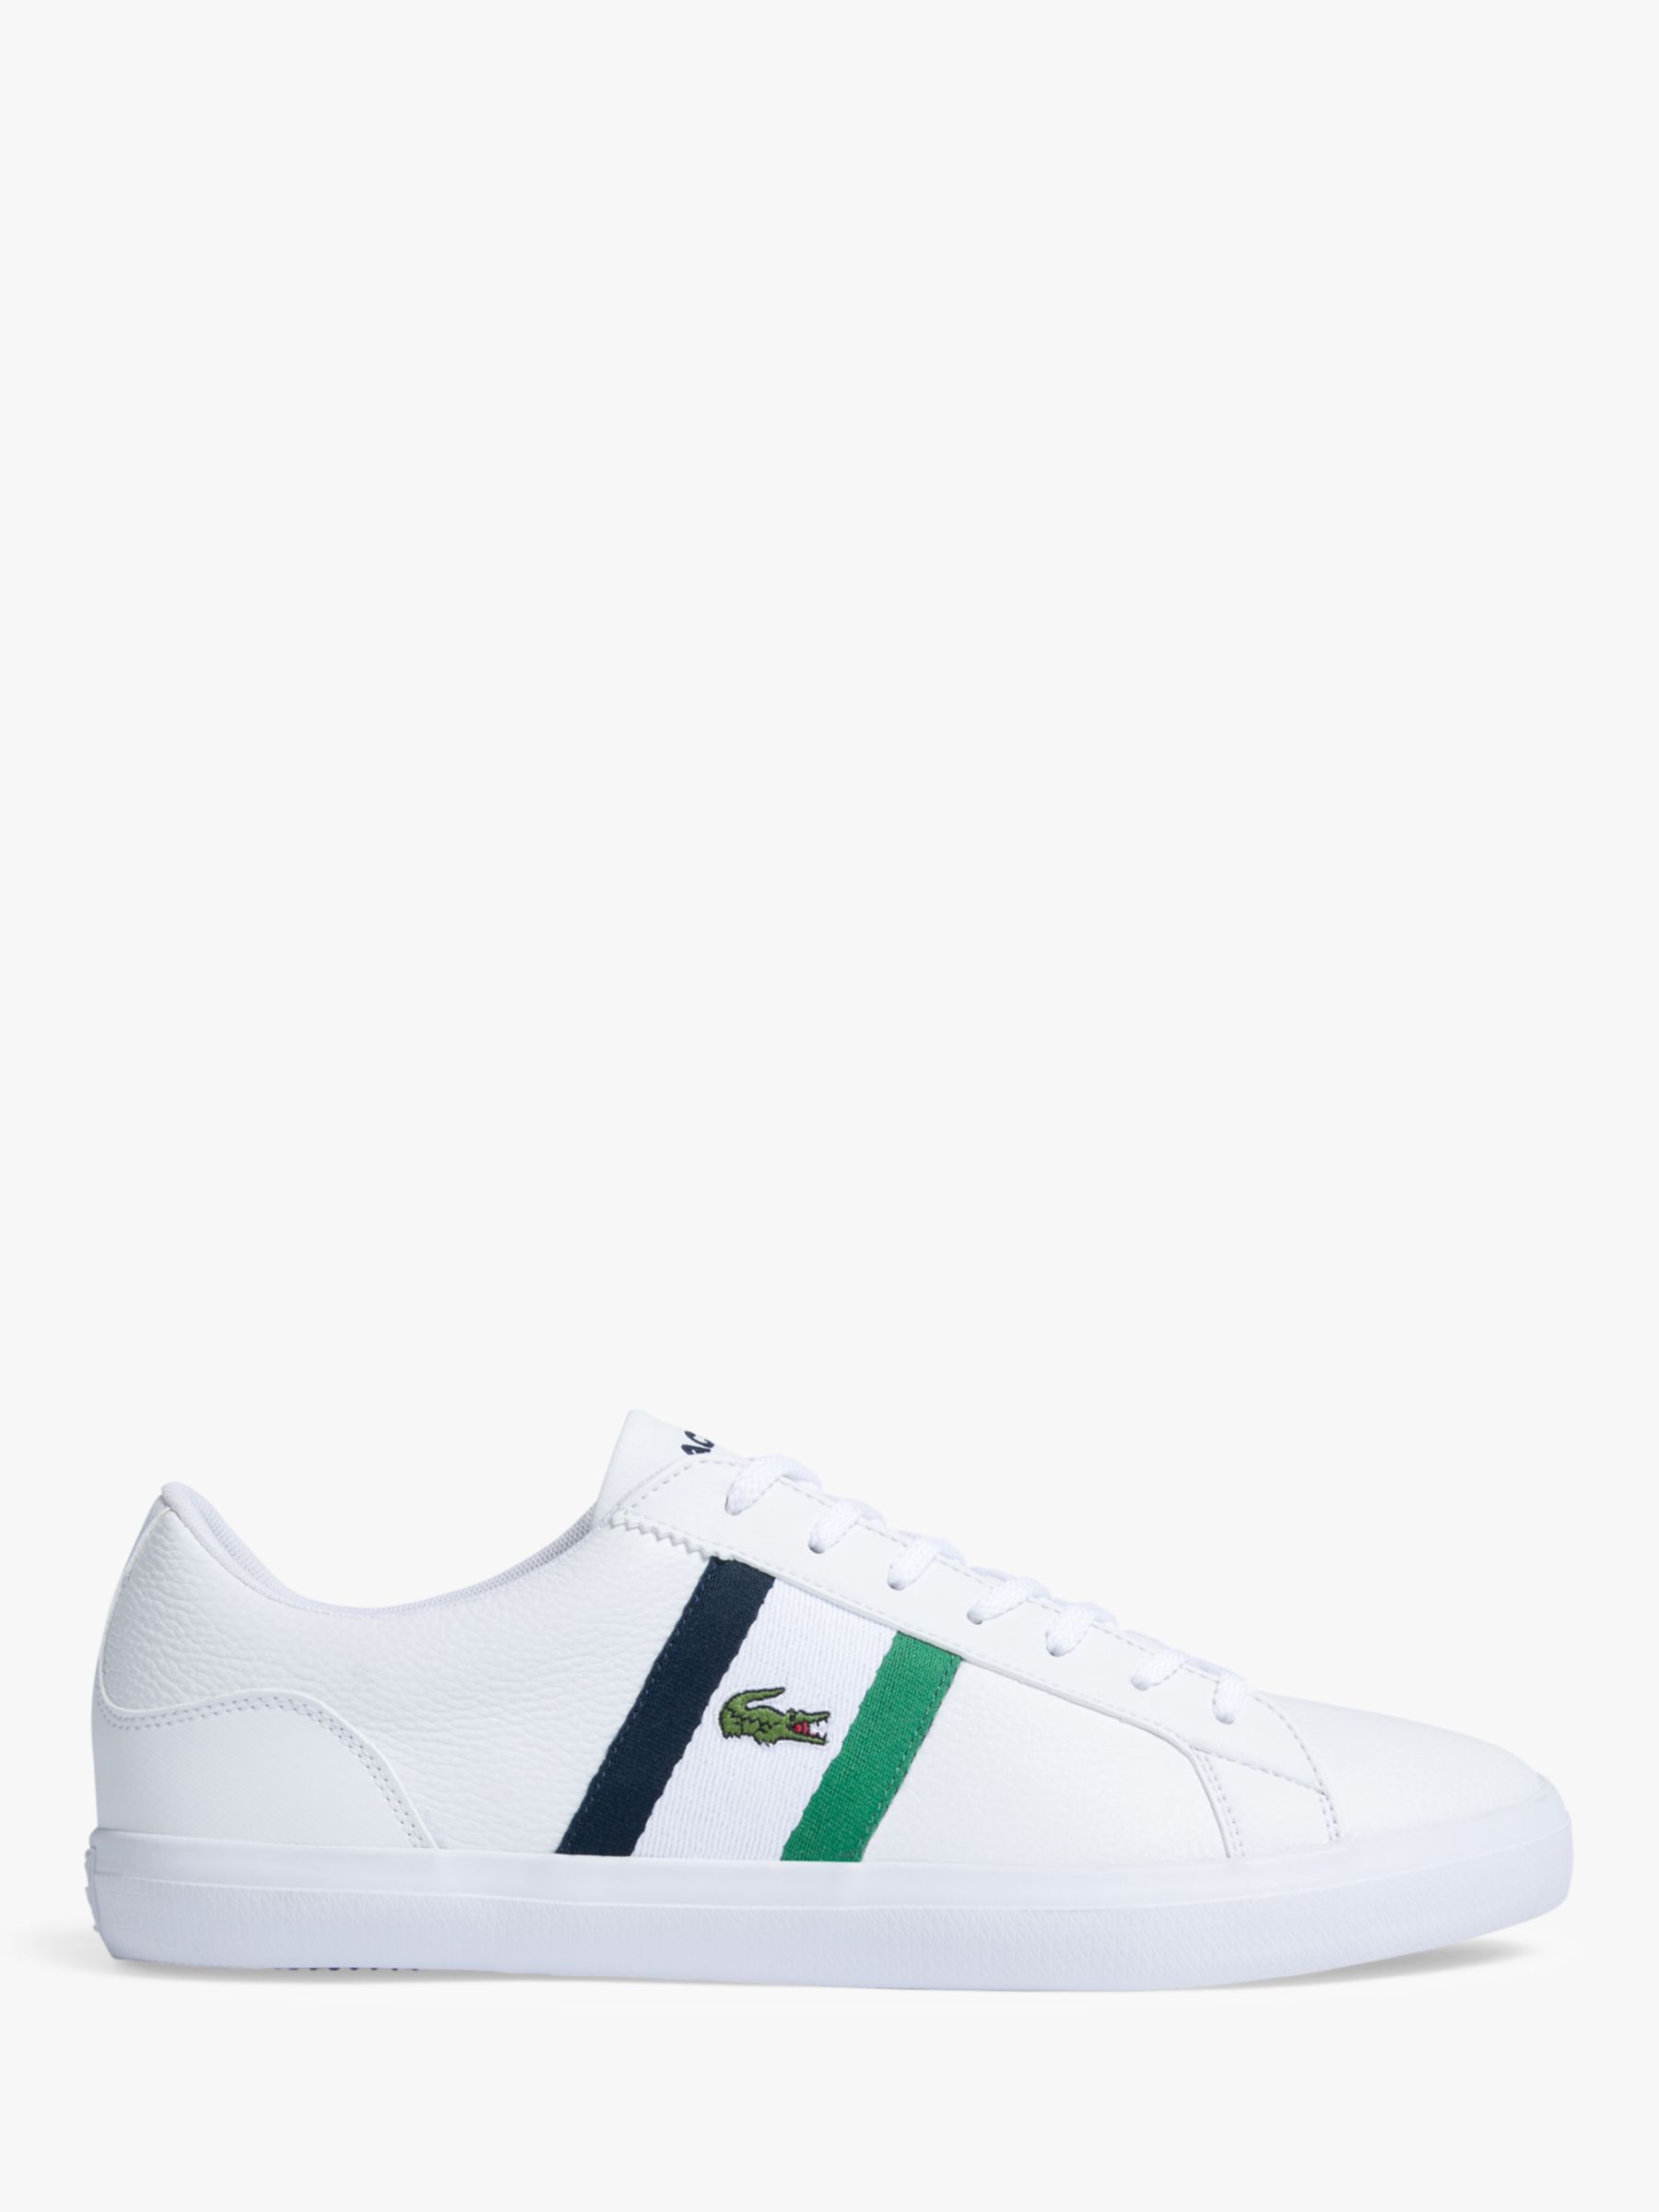 lacoste lerond leather trainers